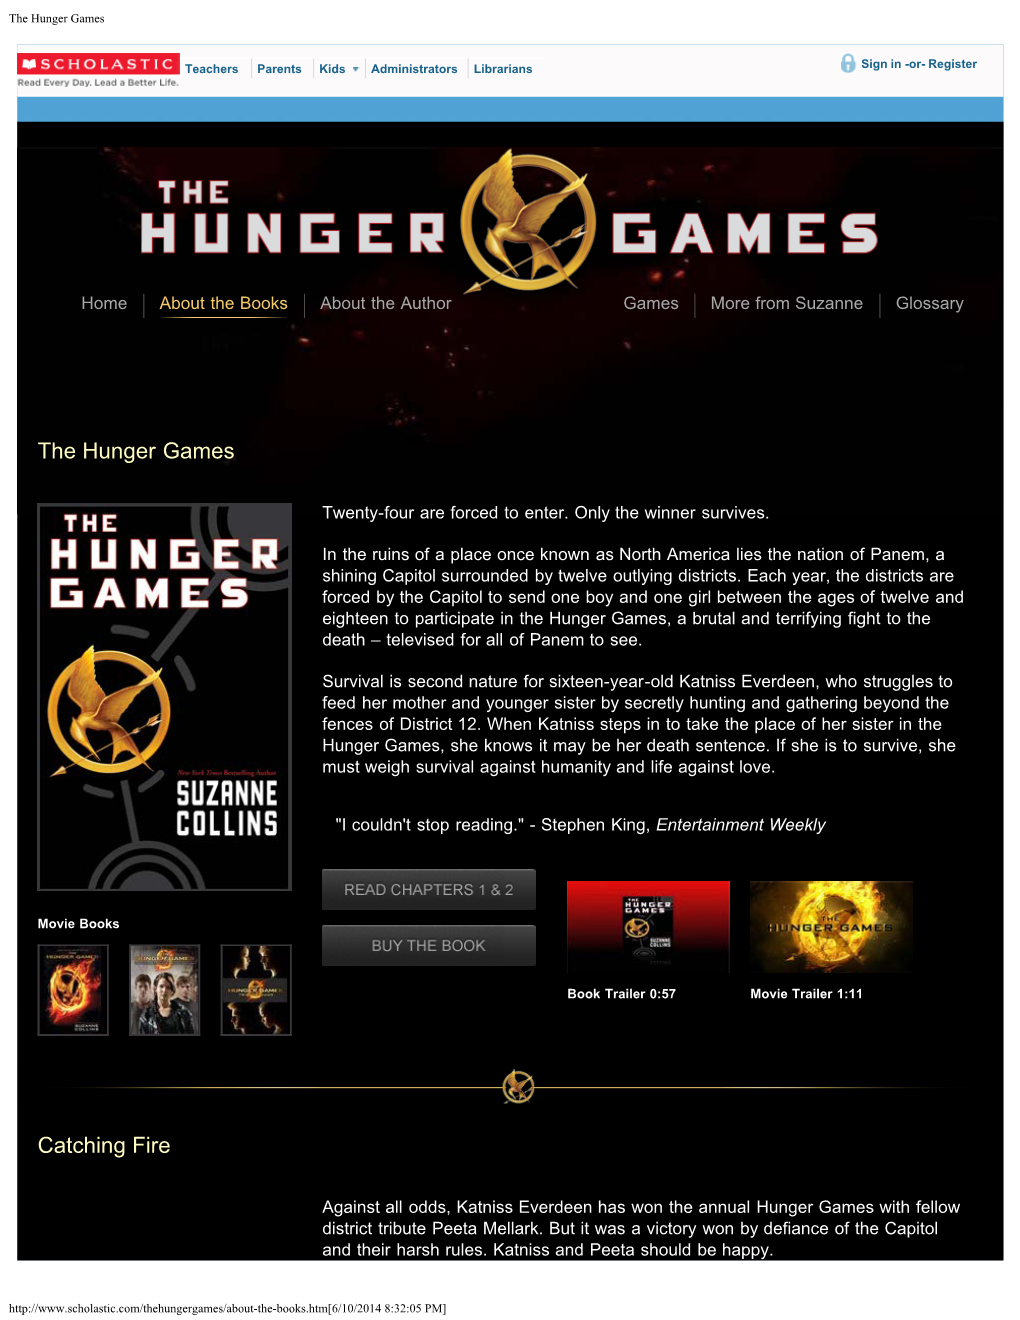 Document-2-The-Hunger-Games.Pdf